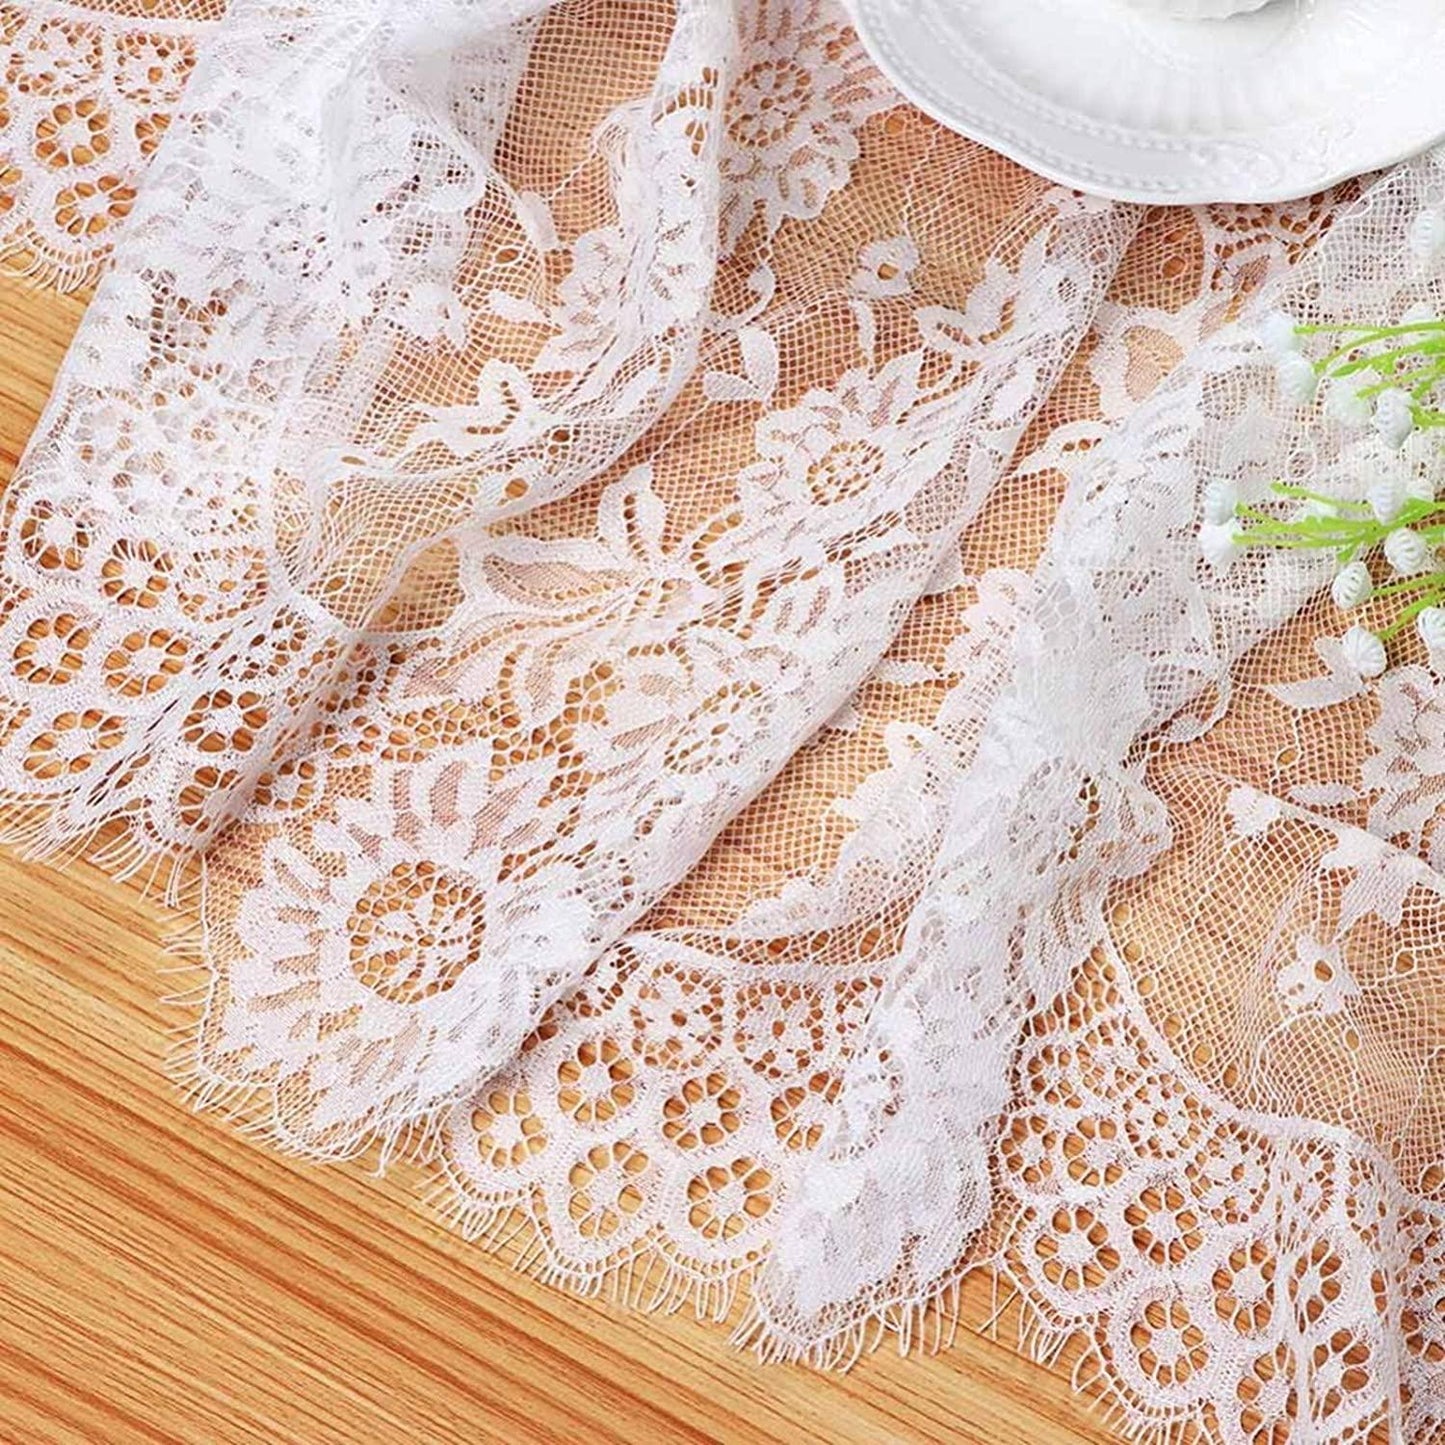 Lace Tablecloth White Wedding Tablecloths 60x120 Inch Vintage Rustic Farmhouse Table Fabric for Romantic Wedding Table Decorations - Lasercutwraps Shop